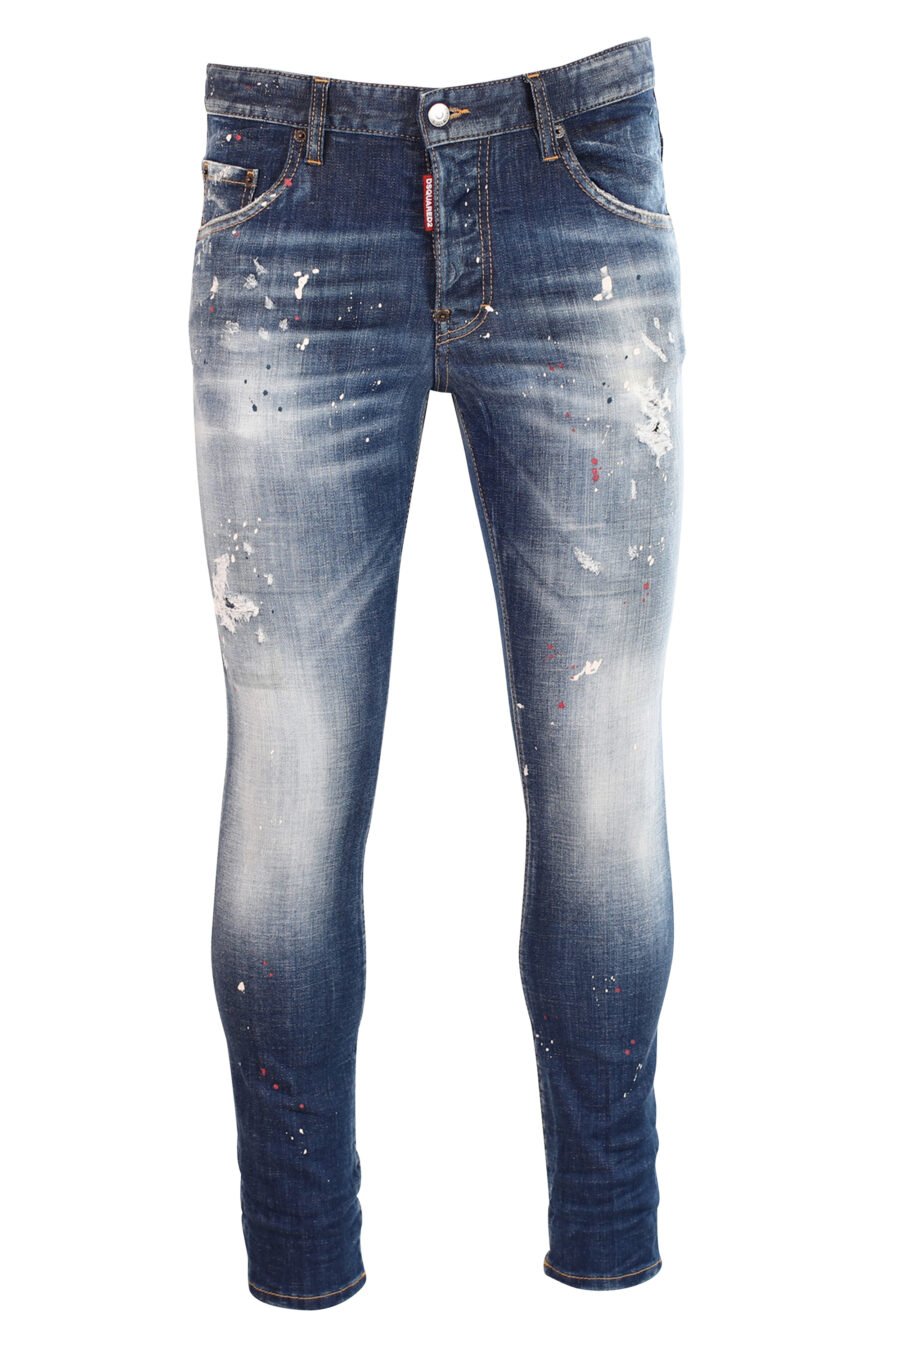 Semi-worn blue "skater" jeans with paint and rips - 8052134940020